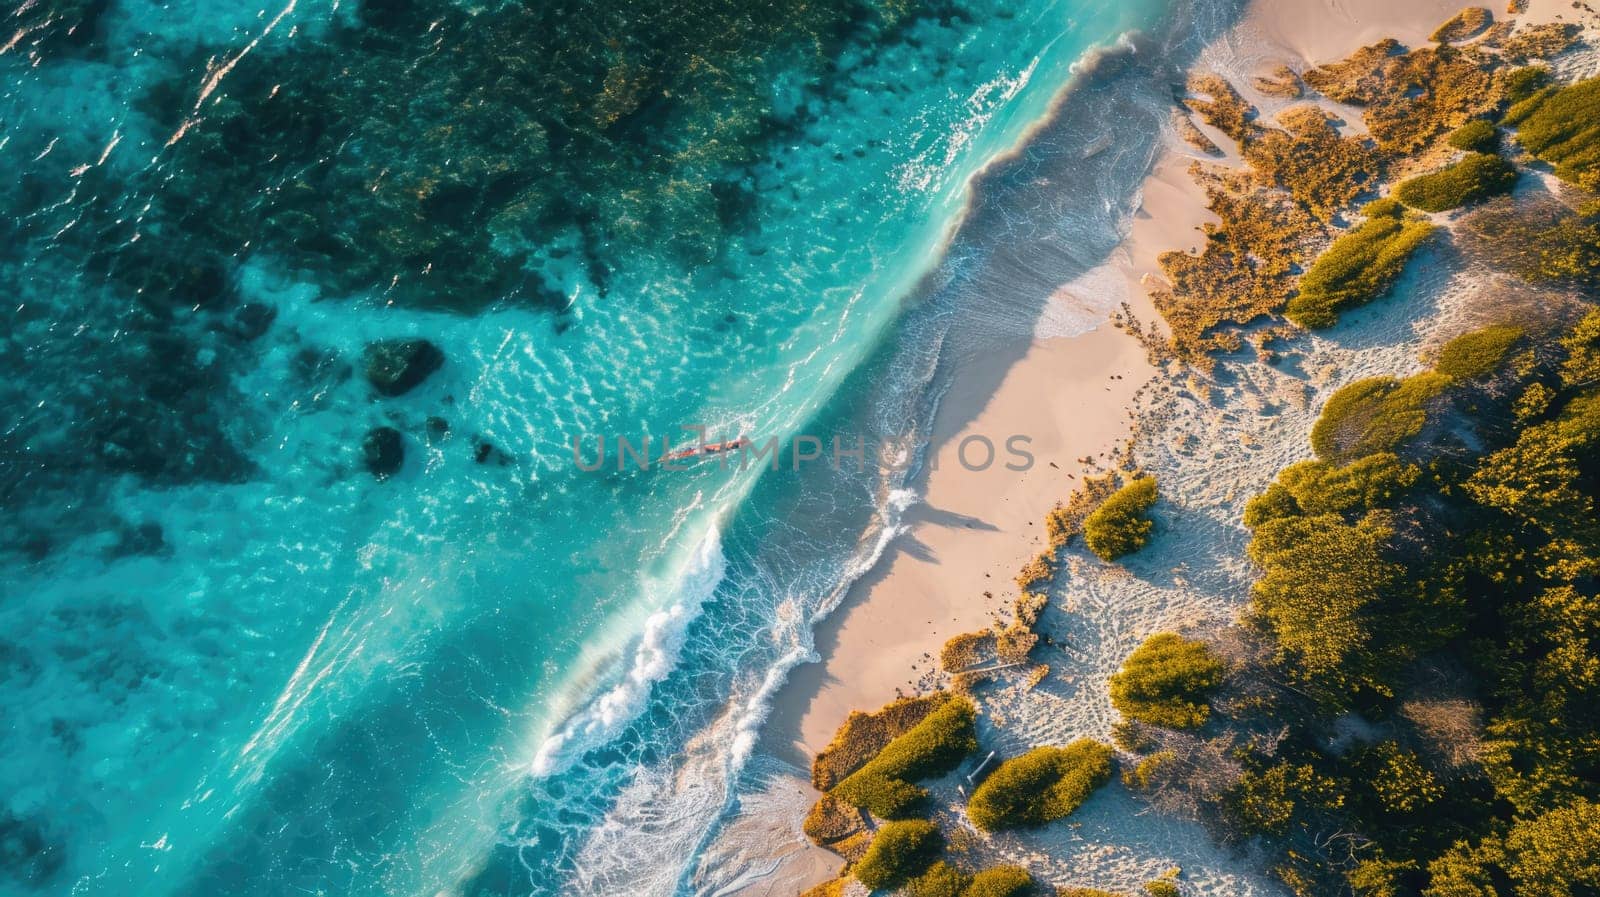 The magnificent view from above of the deep blue sea caressing the sandy shore creates a captivating picture of calm and harmony with nature, inspiring adventure.